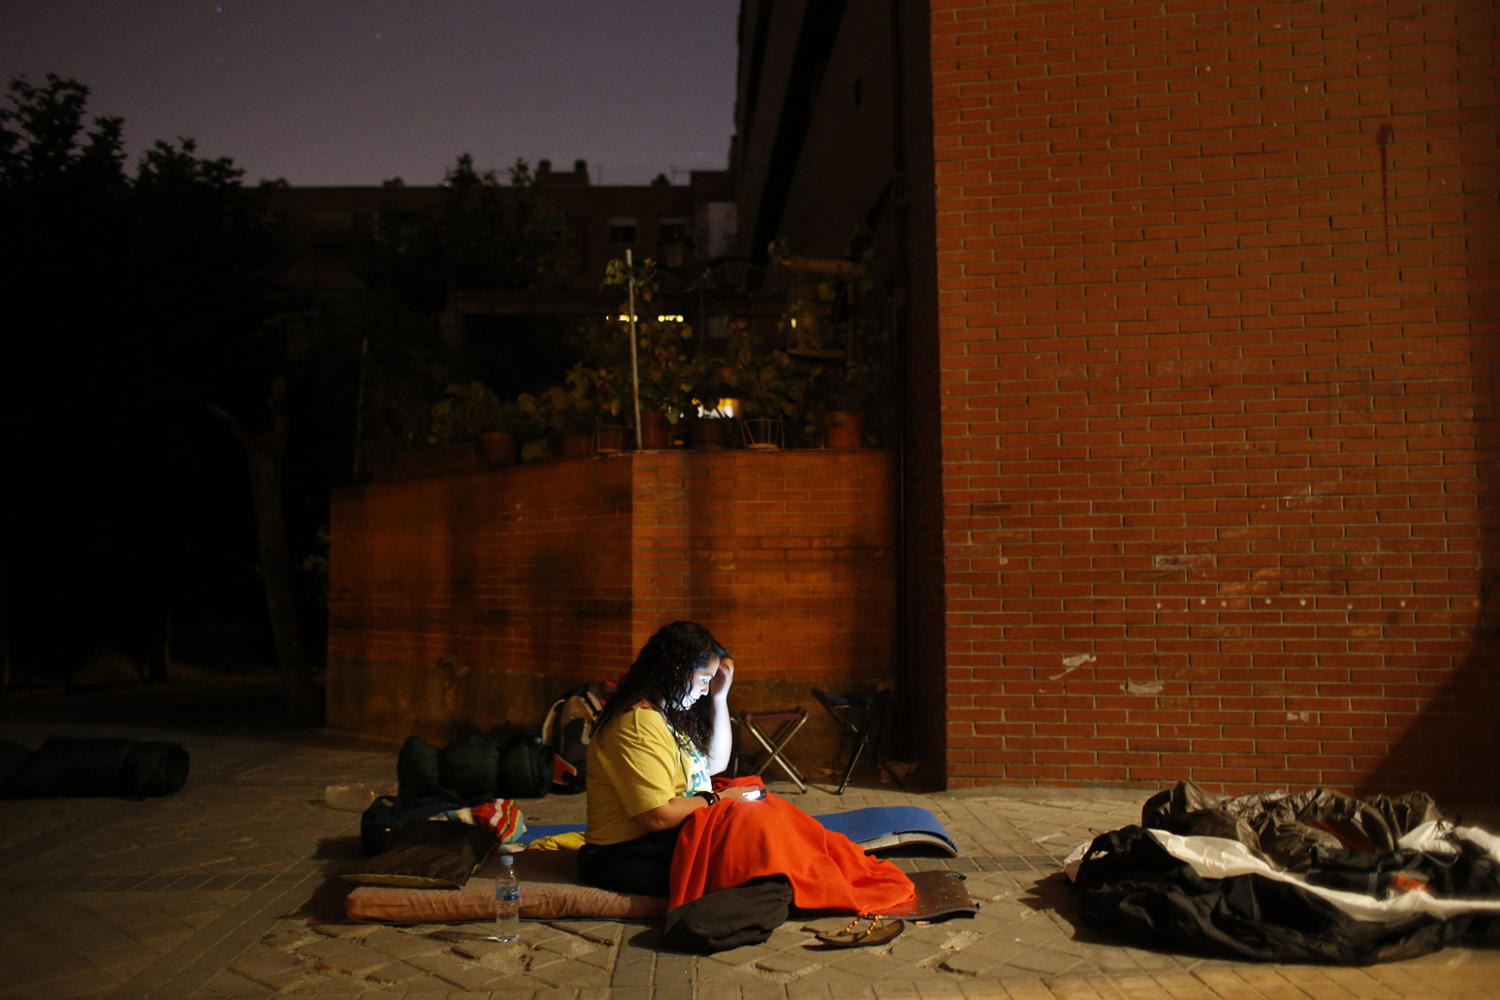 Anti-eviction activist checks her phone as she camps outside the home of Susana Santiago Montoya and her family to try to prevent her eviction in Madrid